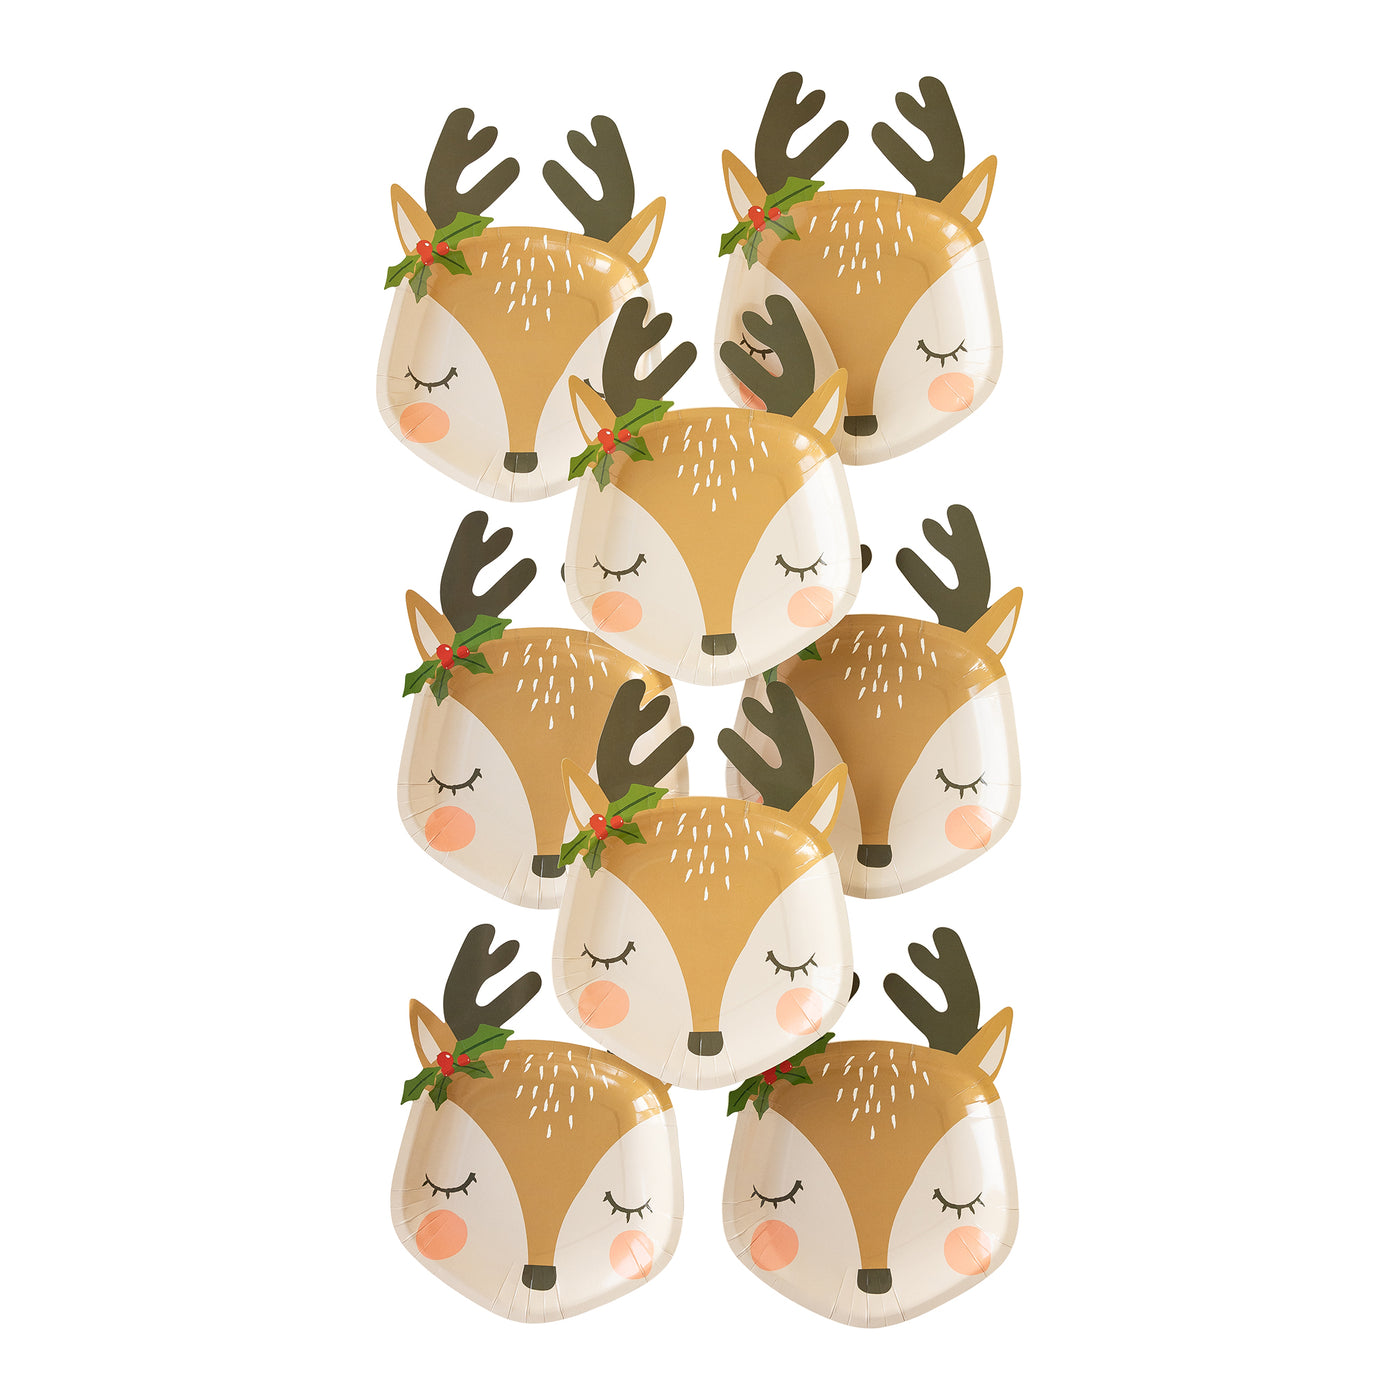 PLTS390A - Reindeer Shaped Paper Plate